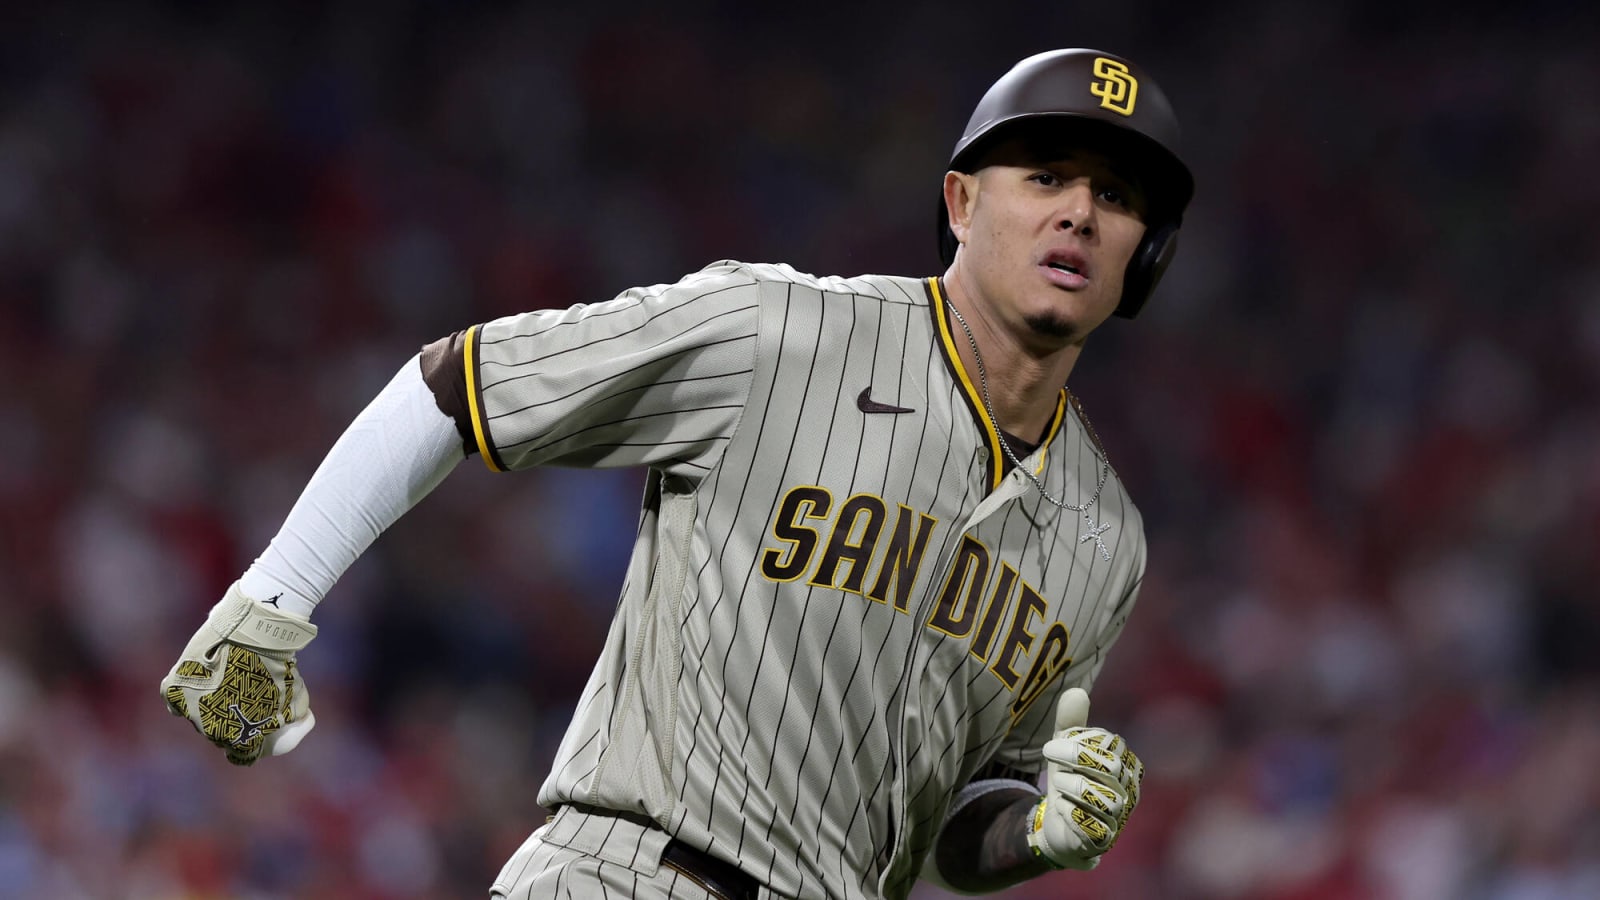 Manny Machado plans to exercise opt-out after 2023 season